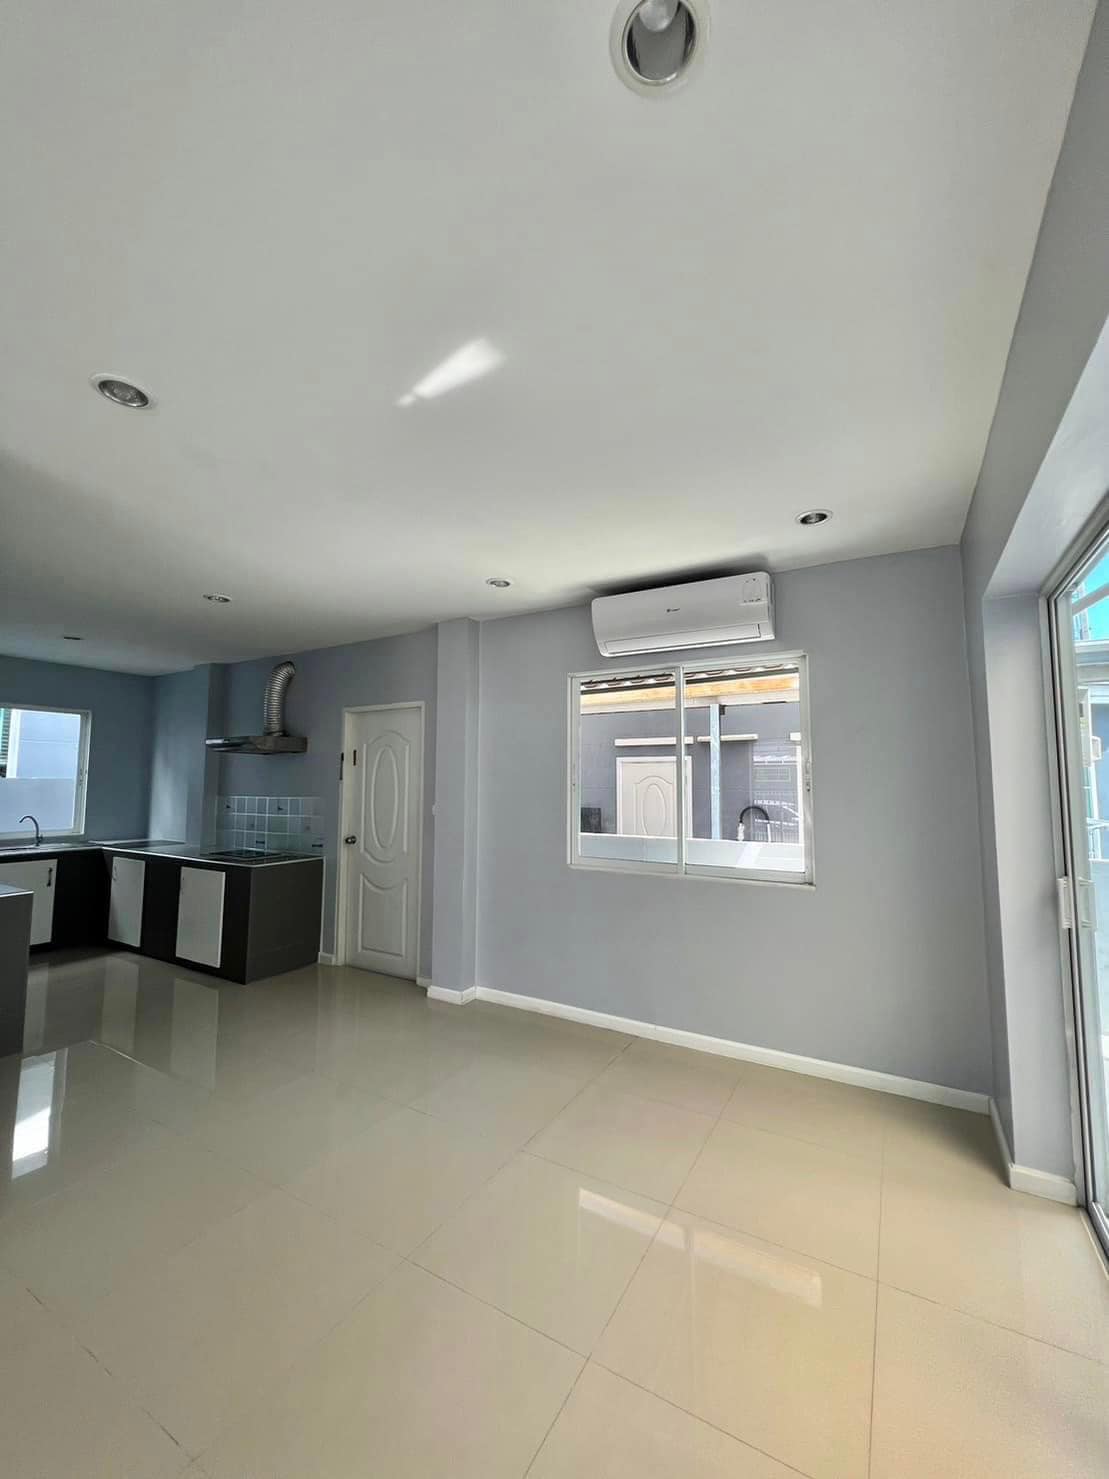 Winston Village. New house with 3 bedrooms in the village close to Sukhumvit Road